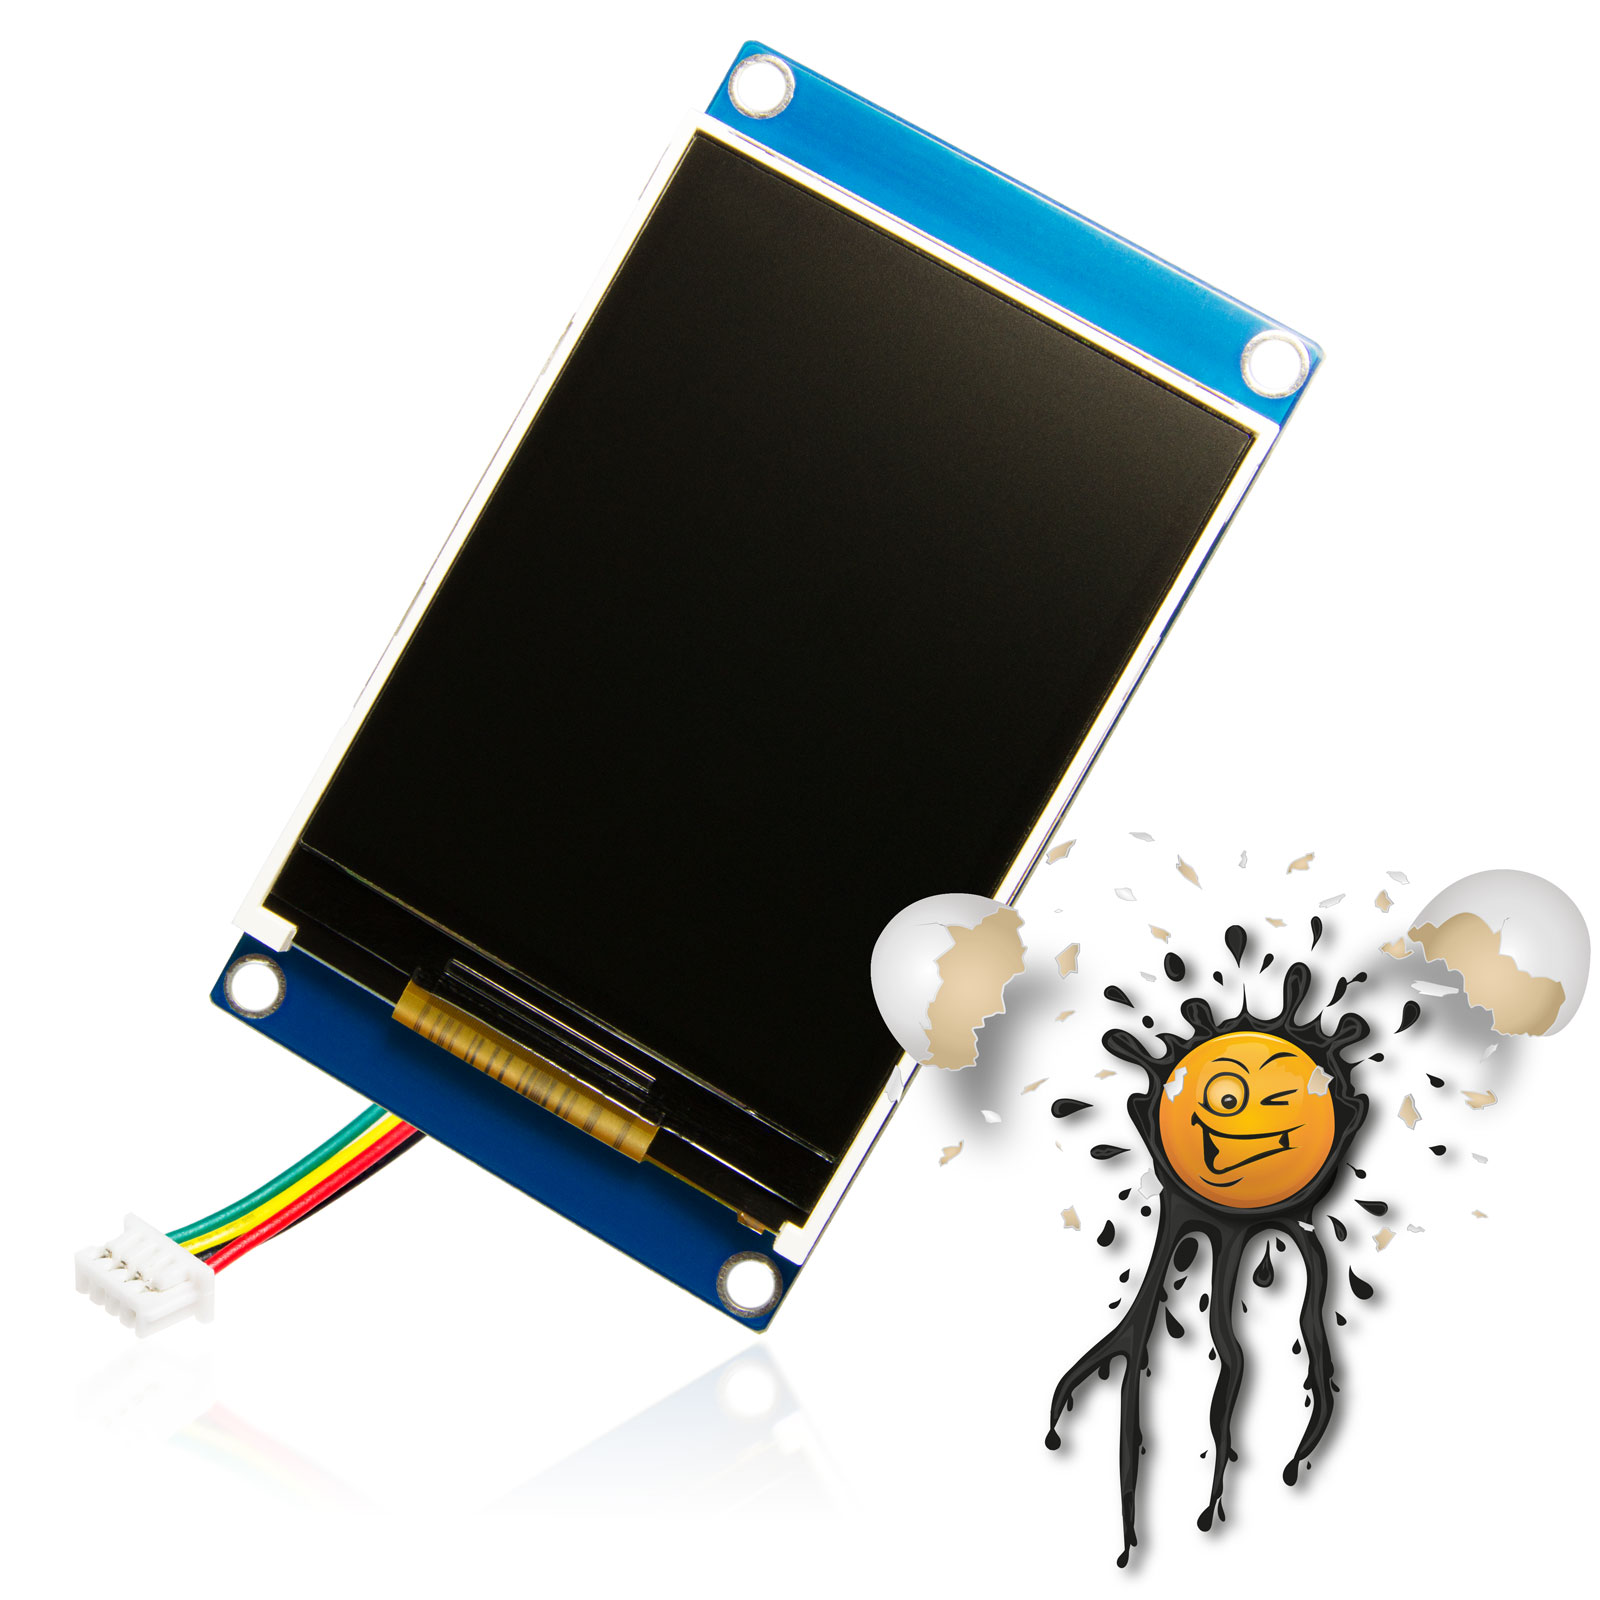 easy seriell UART 2,4 inch TFT Farb Display mit JST Adapterkabel